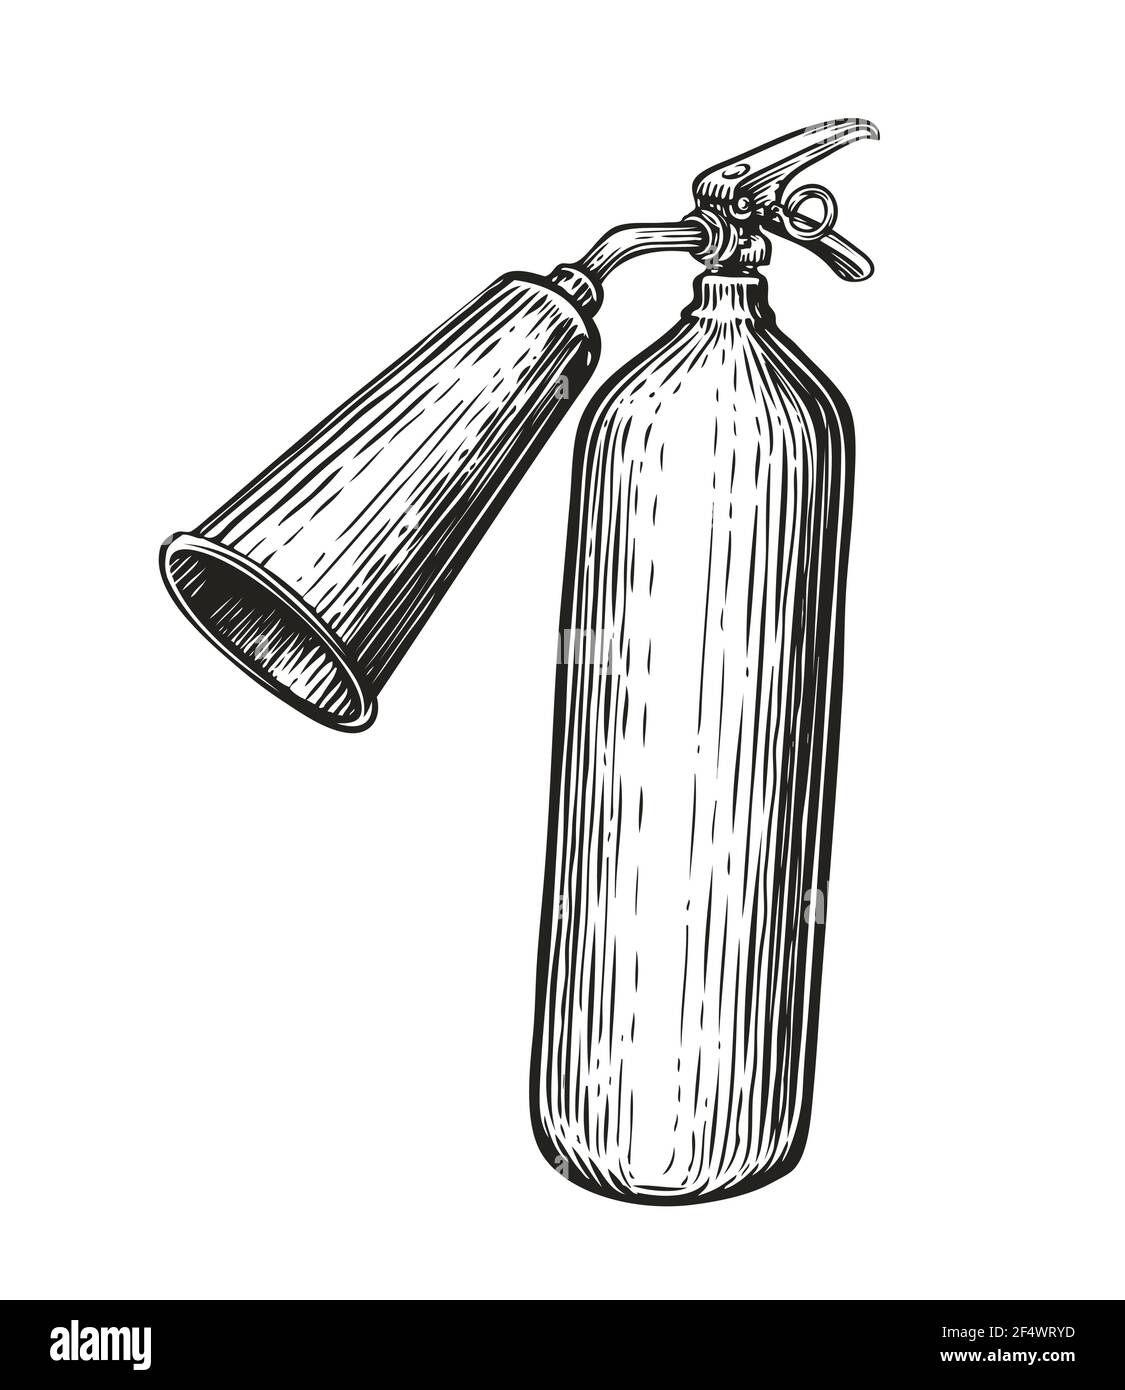 Fire extinguisher in vintage engraving style. Hand drawn sketch vector illustration Stock Vector